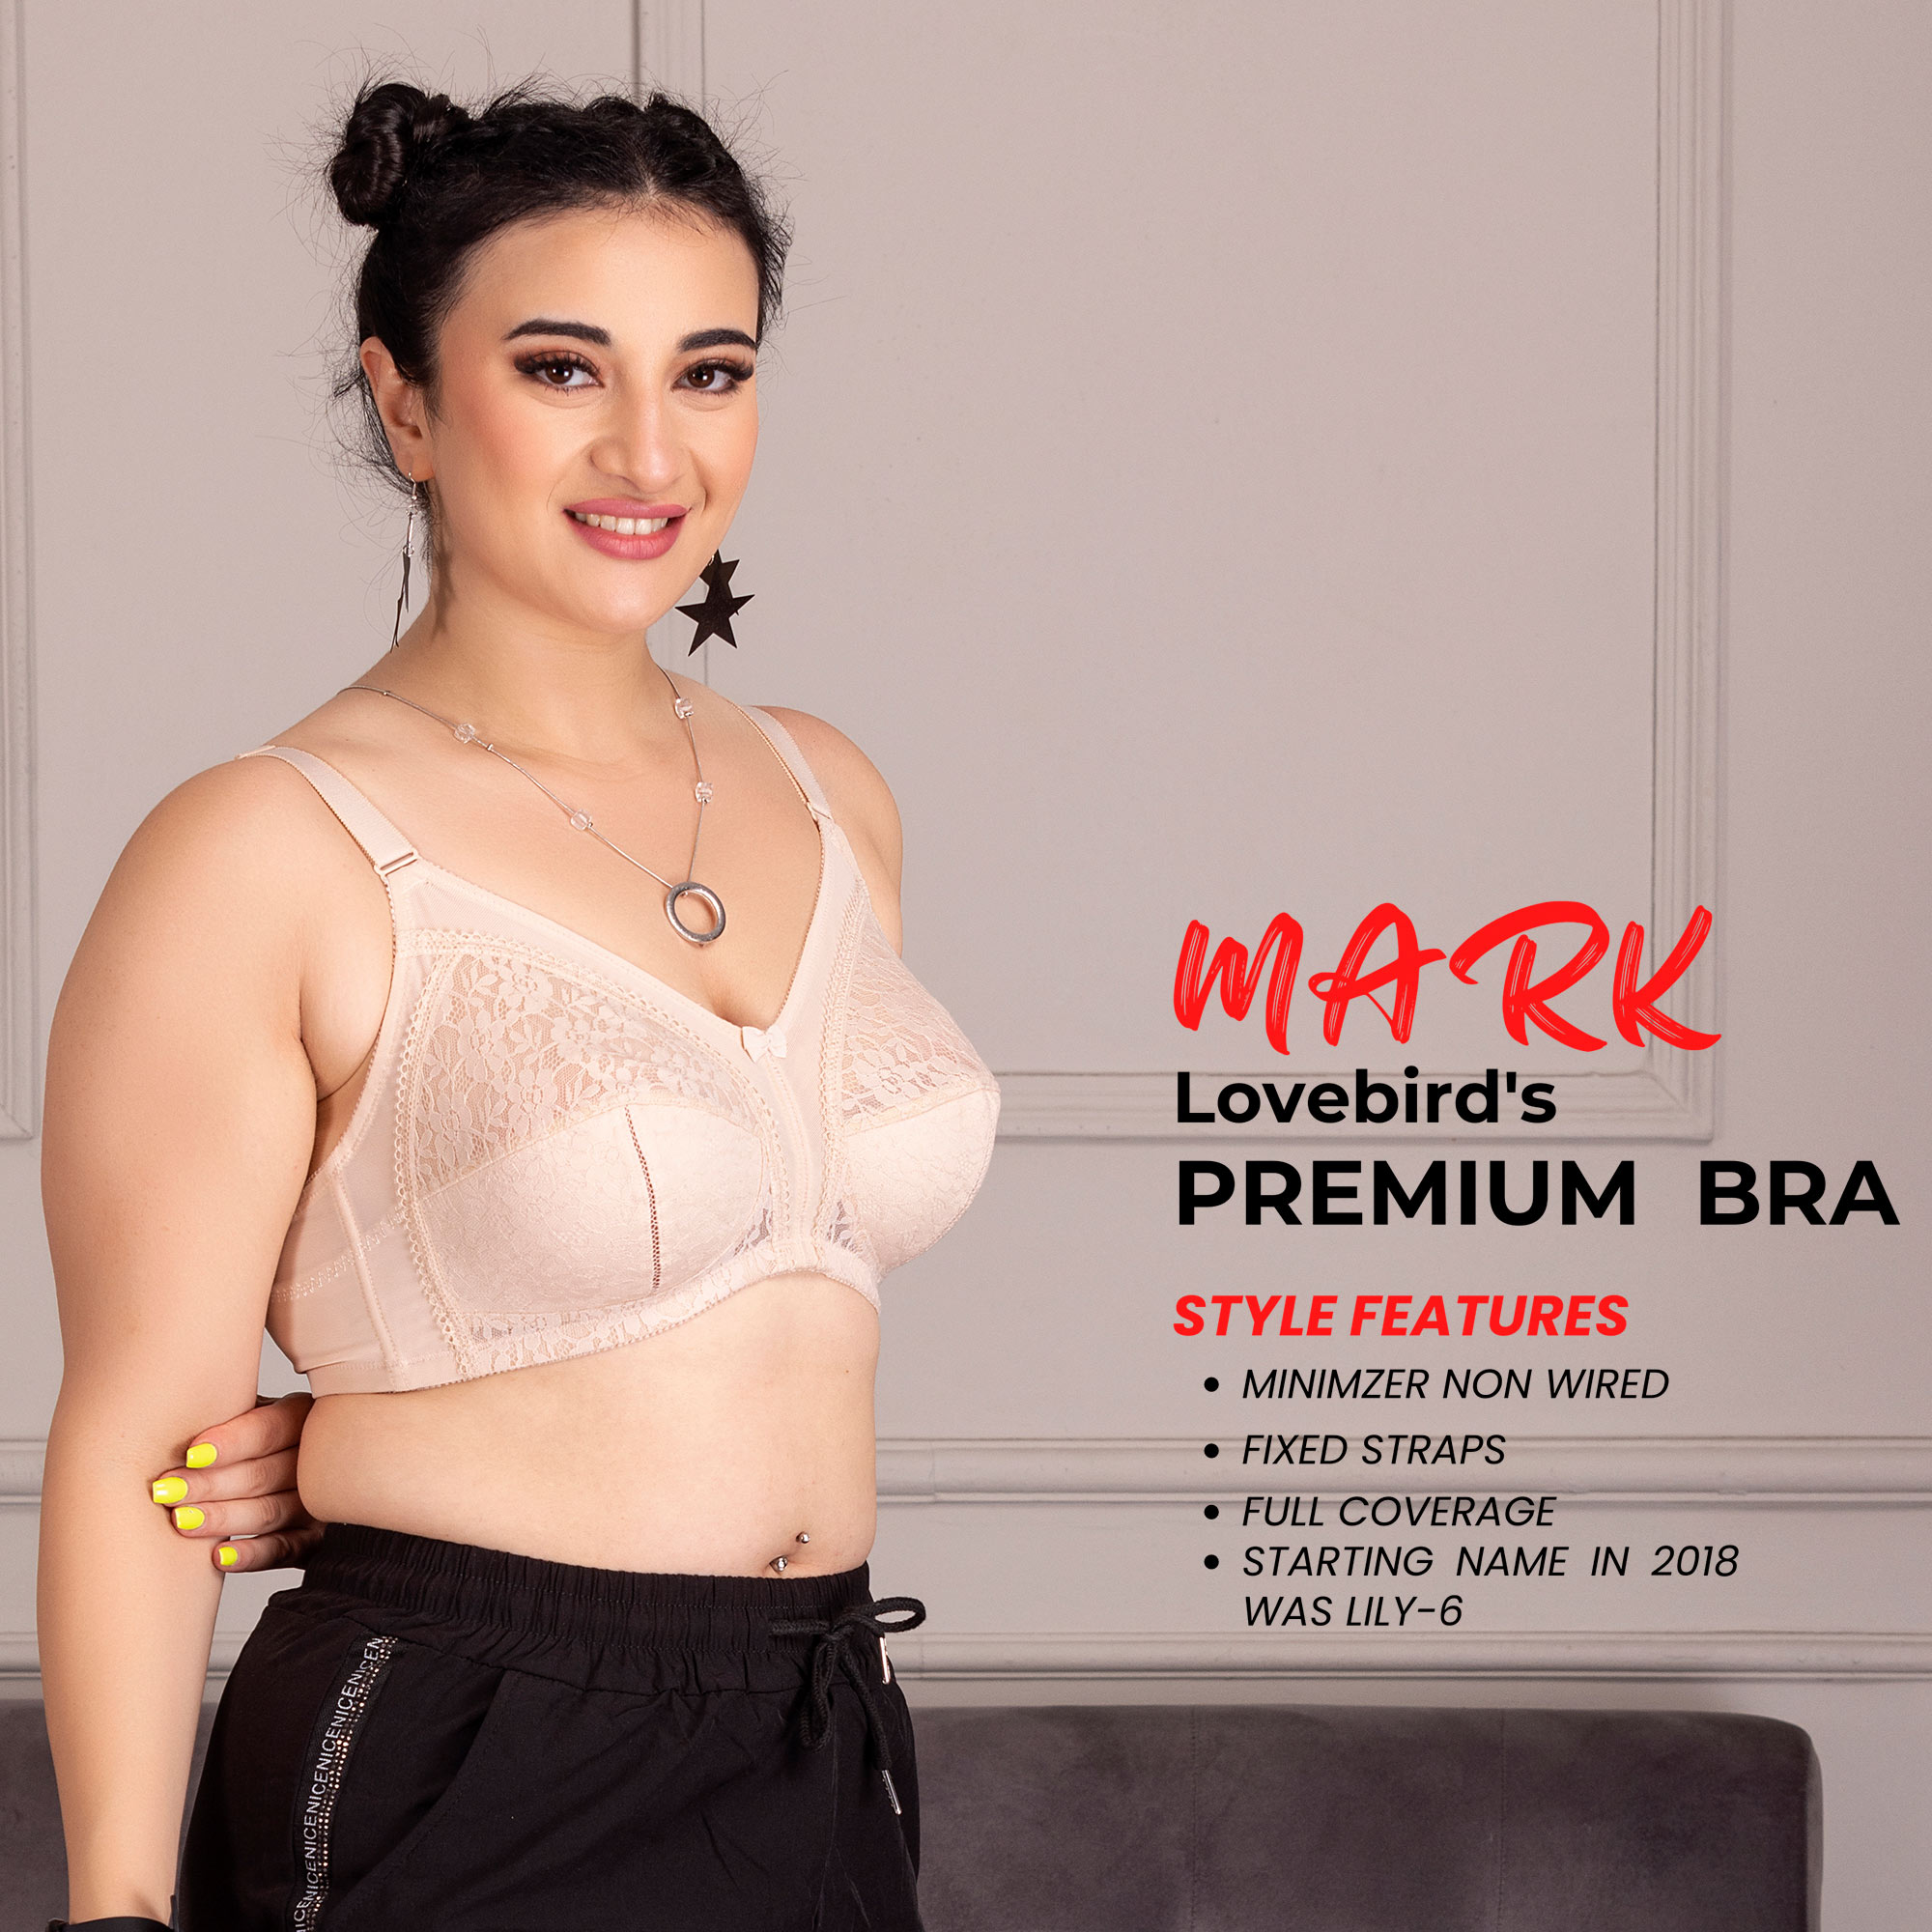 Ladies Bras Marks & Spencer Sale! - Poland, New - The wholesale